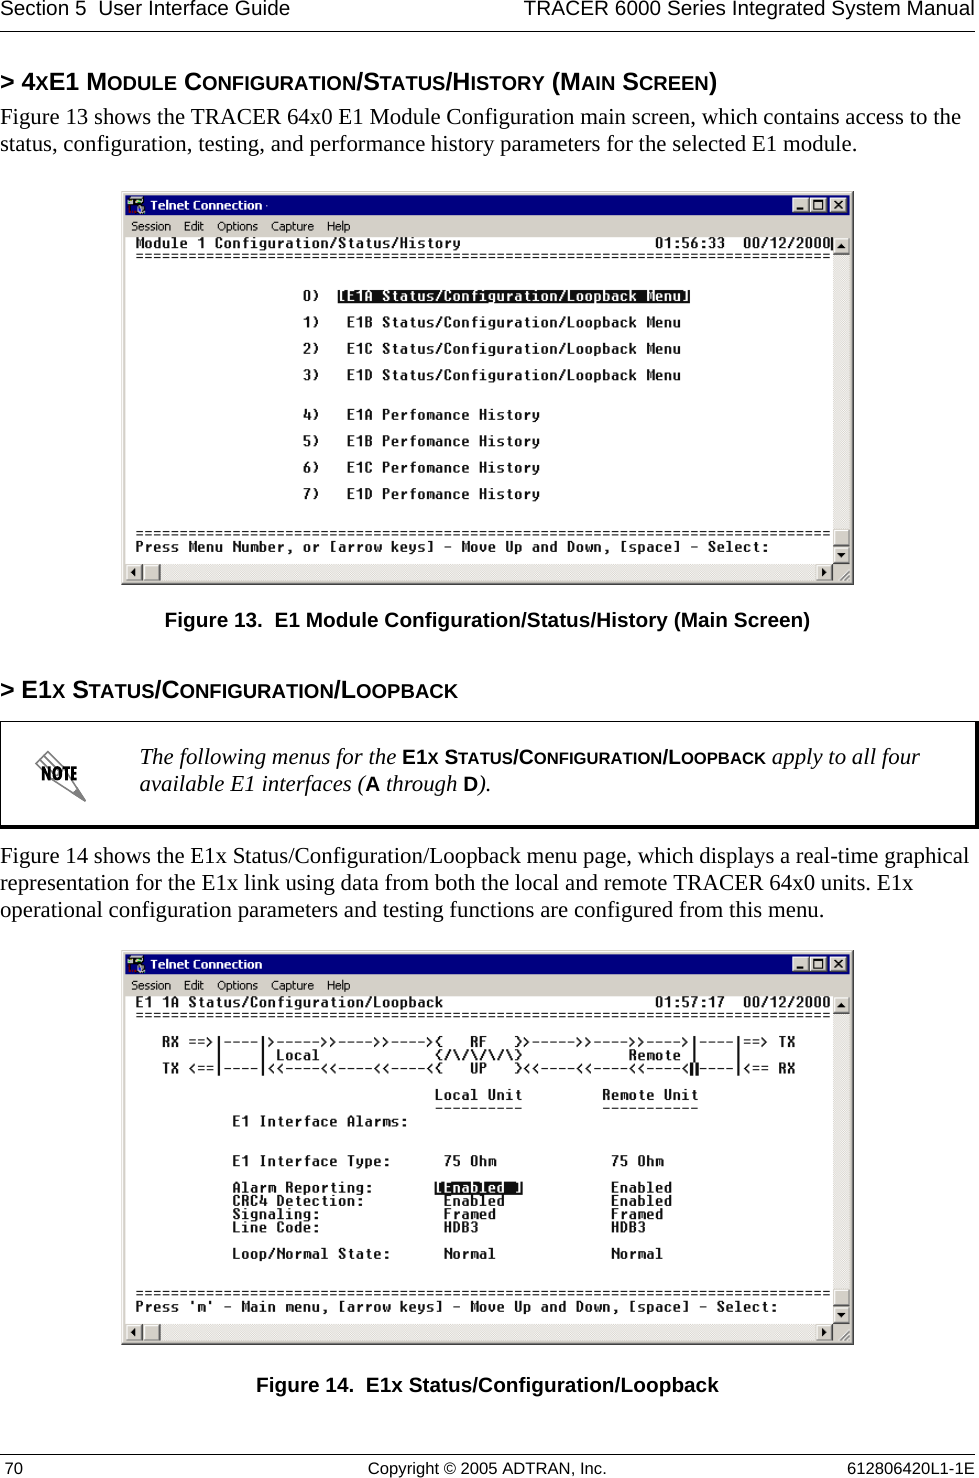 Section 5  User Interface Guide TRACER 6000 Series Integrated System Manual 70 Copyright © 2005 ADTRAN, Inc. 612806420L1-1E&gt; 4XE1 MODULE CONFIGURATION/STATUS/HISTORY (MAIN SCREEN)Figure 13 shows the TRACER 64x0 E1 Module Configuration main screen, which contains access to the status, configuration, testing, and performance history parameters for the selected E1 module.Figure 13.  E1 Module Configuration/Status/History (Main Screen)&gt; E1X STATUS/CONFIGURATION/LOOPBACKFigure 14 shows the E1x Status/Configuration/Loopback menu page, which displays a real-time graphical representation for the E1x link using data from both the local and remote TRACER 64x0 units. E1x operational configuration parameters and testing functions are configured from this menu.Figure 14.  E1x Status/Configuration/LoopbackThe following menus for the E1X STATUS/CONFIGURATION/LOOPBACK apply to all four available E1 interfaces (A through D).